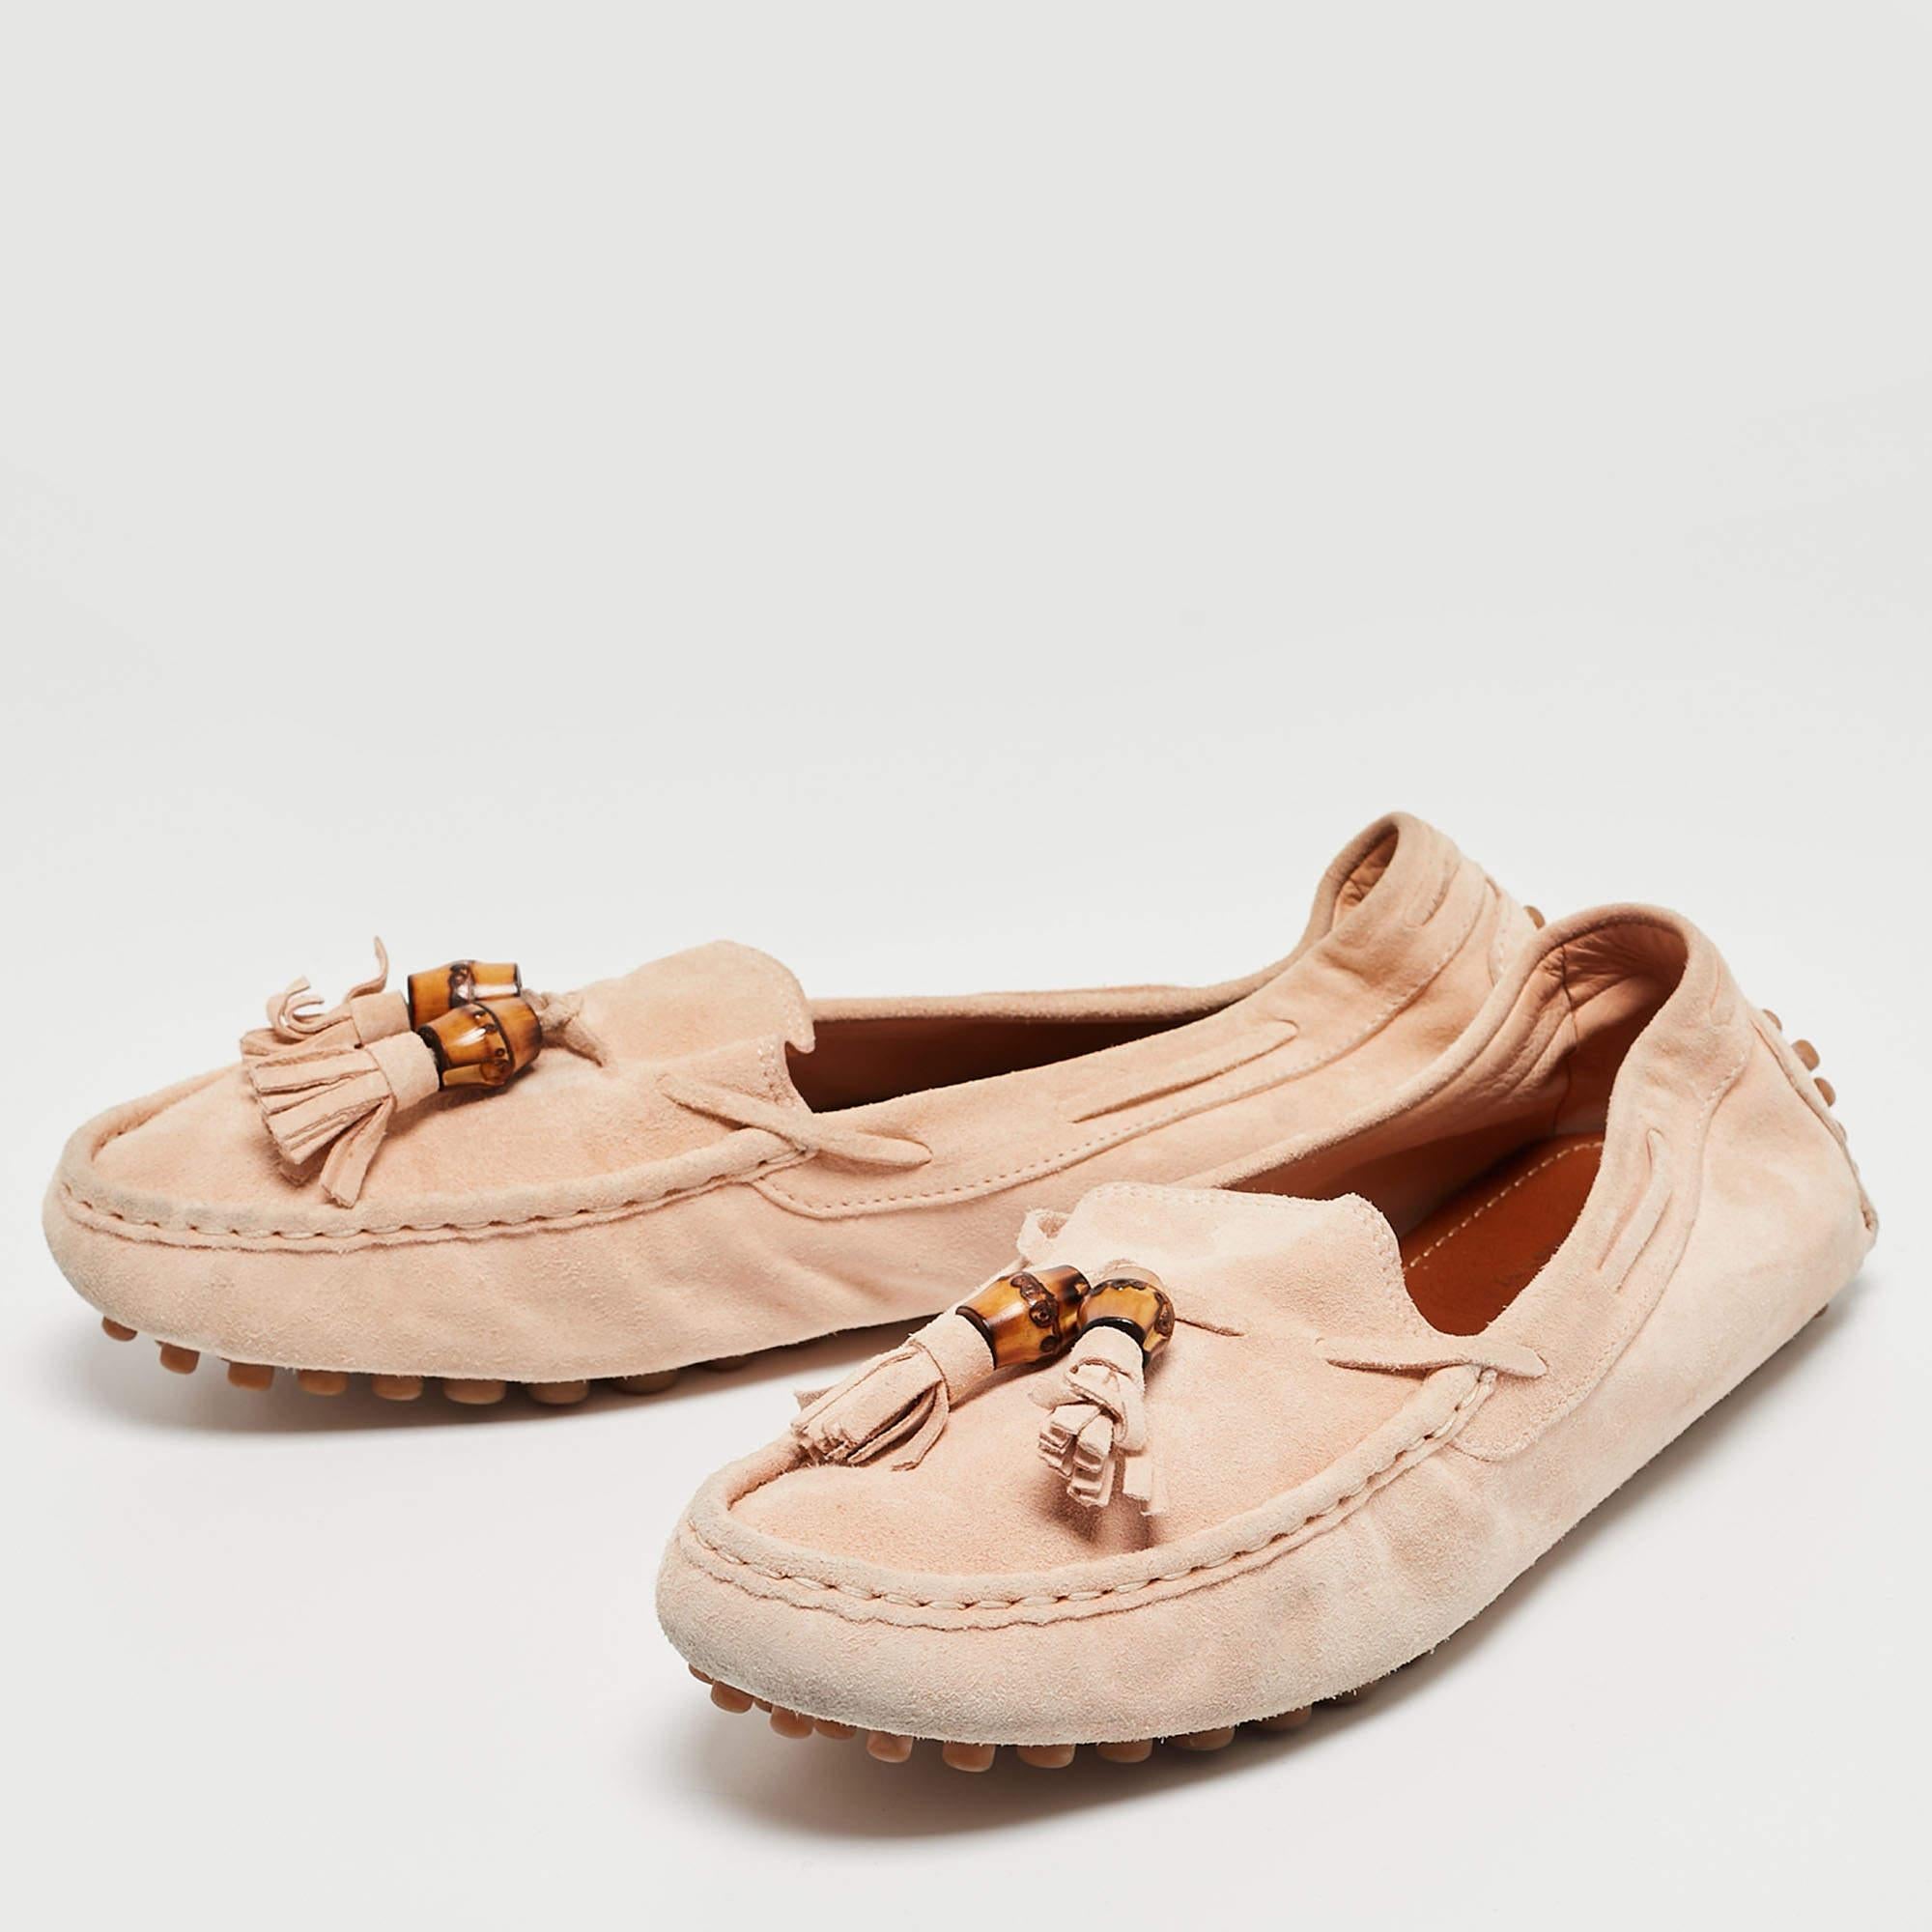 Gucci Light Pink Suede Bamboo Tassel Slip On Loafers Size 37.5 In Good Condition For Sale In Dubai, Al Qouz 2